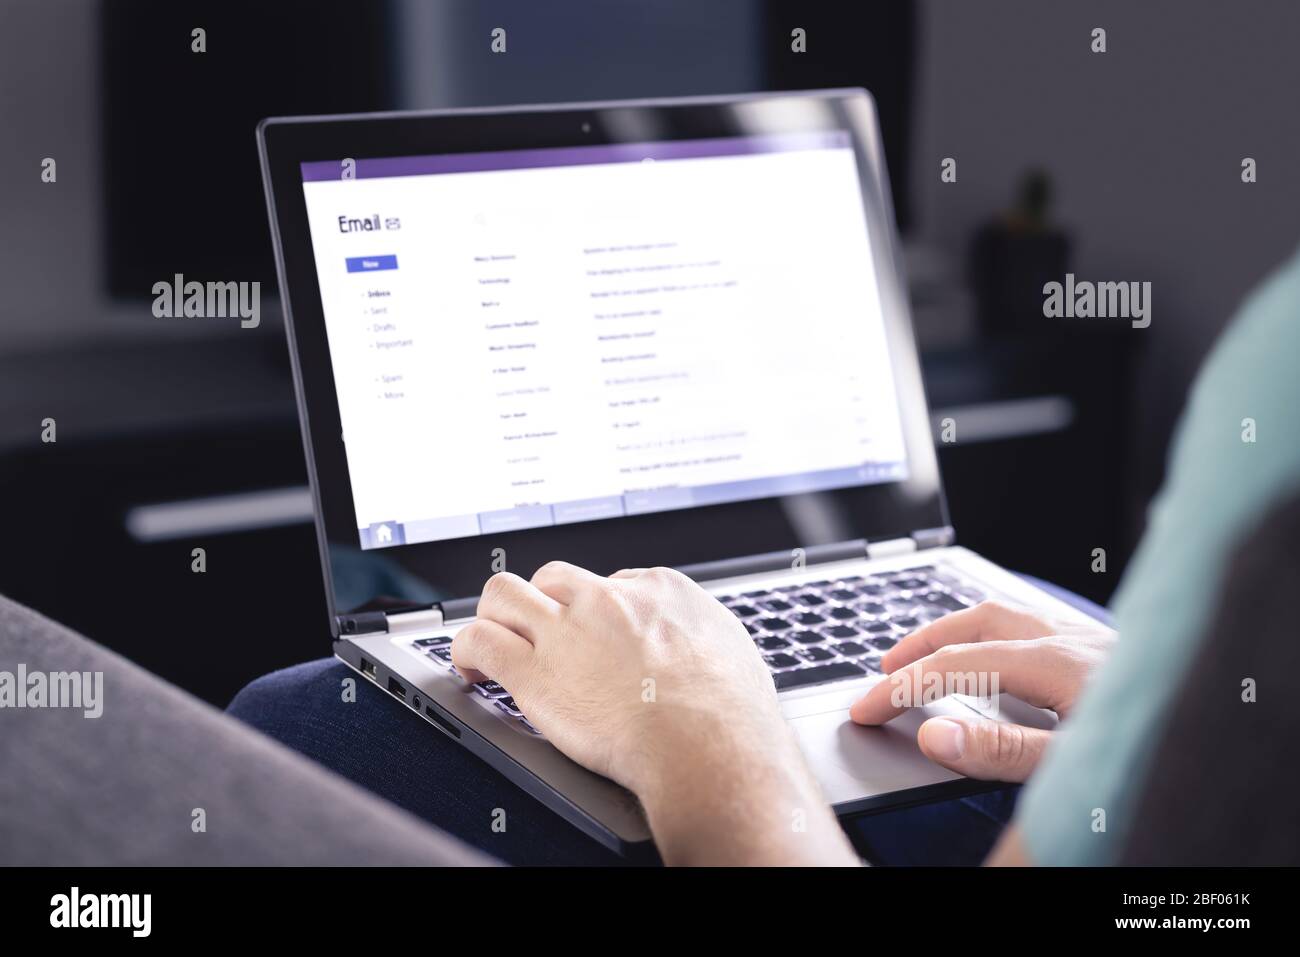 Email inbox on laptop screen. List of messages. Man checking received e mail. Spam, junk and digital marketing. Read, reply or forward posts. Stock Photo